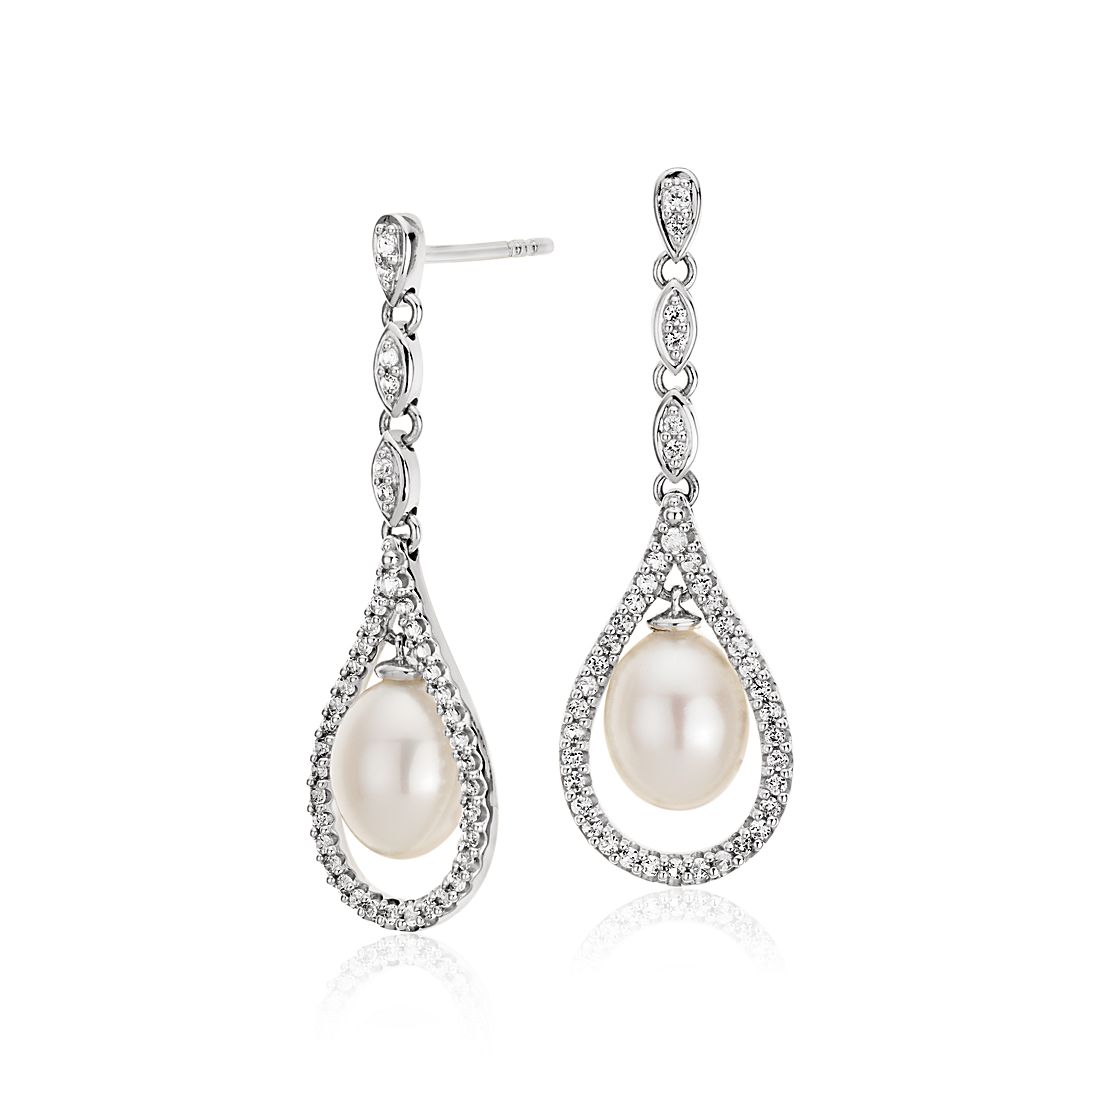 bluenile.com | Vintage-Inspired Freshwater Cultured Pearl and White Topaz Drop Earrings